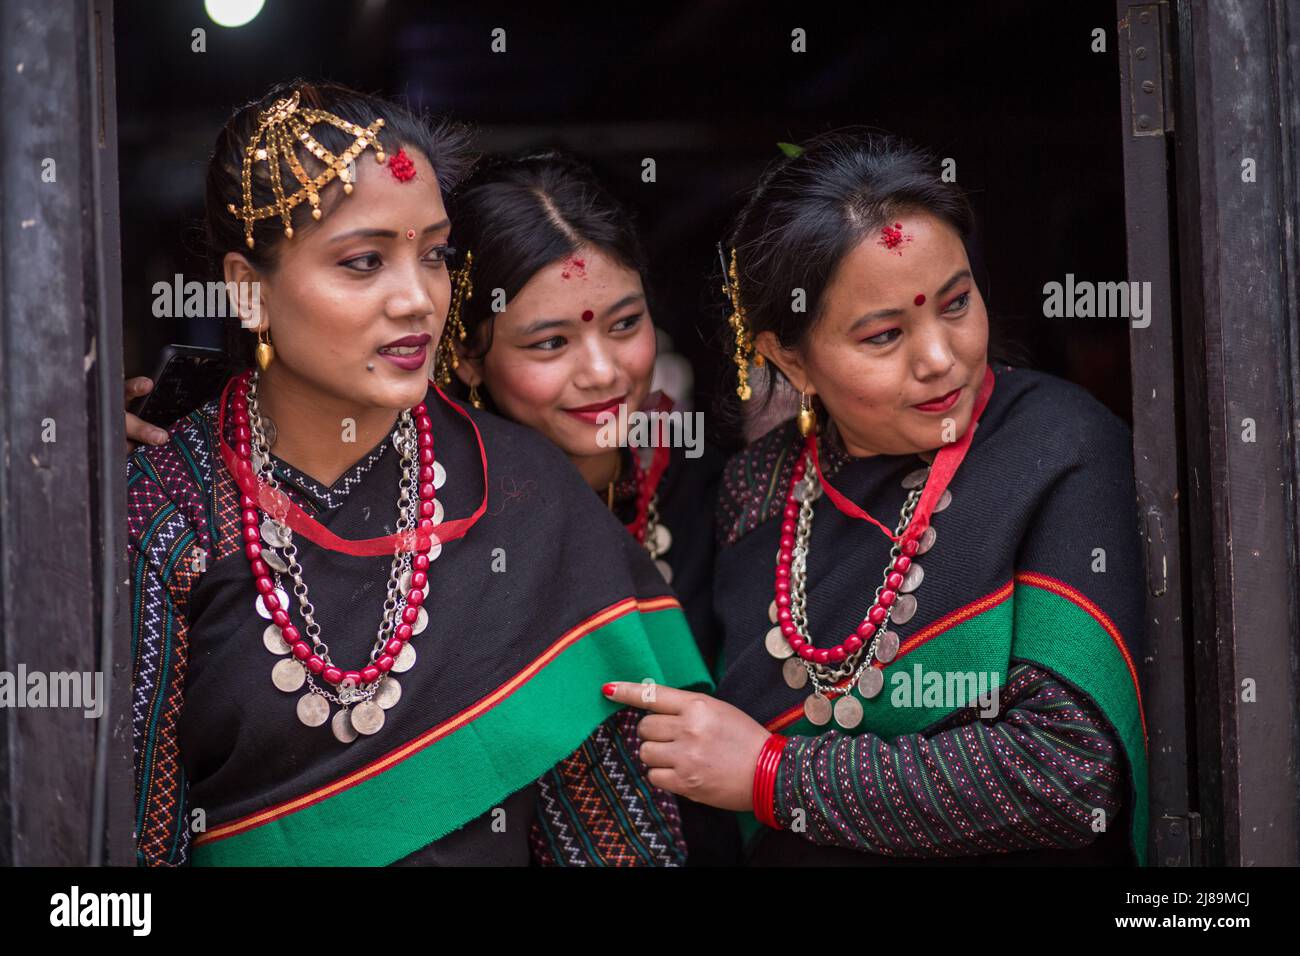 Lalitpur, Nepal. 14th May, 2022. Newar women in traditional attire are seen during a culture show in Lalitpur, Nepal, May 14, 2022. Credit: Hari Maharjan/Xinhua/Alamy Live News Stock Photo